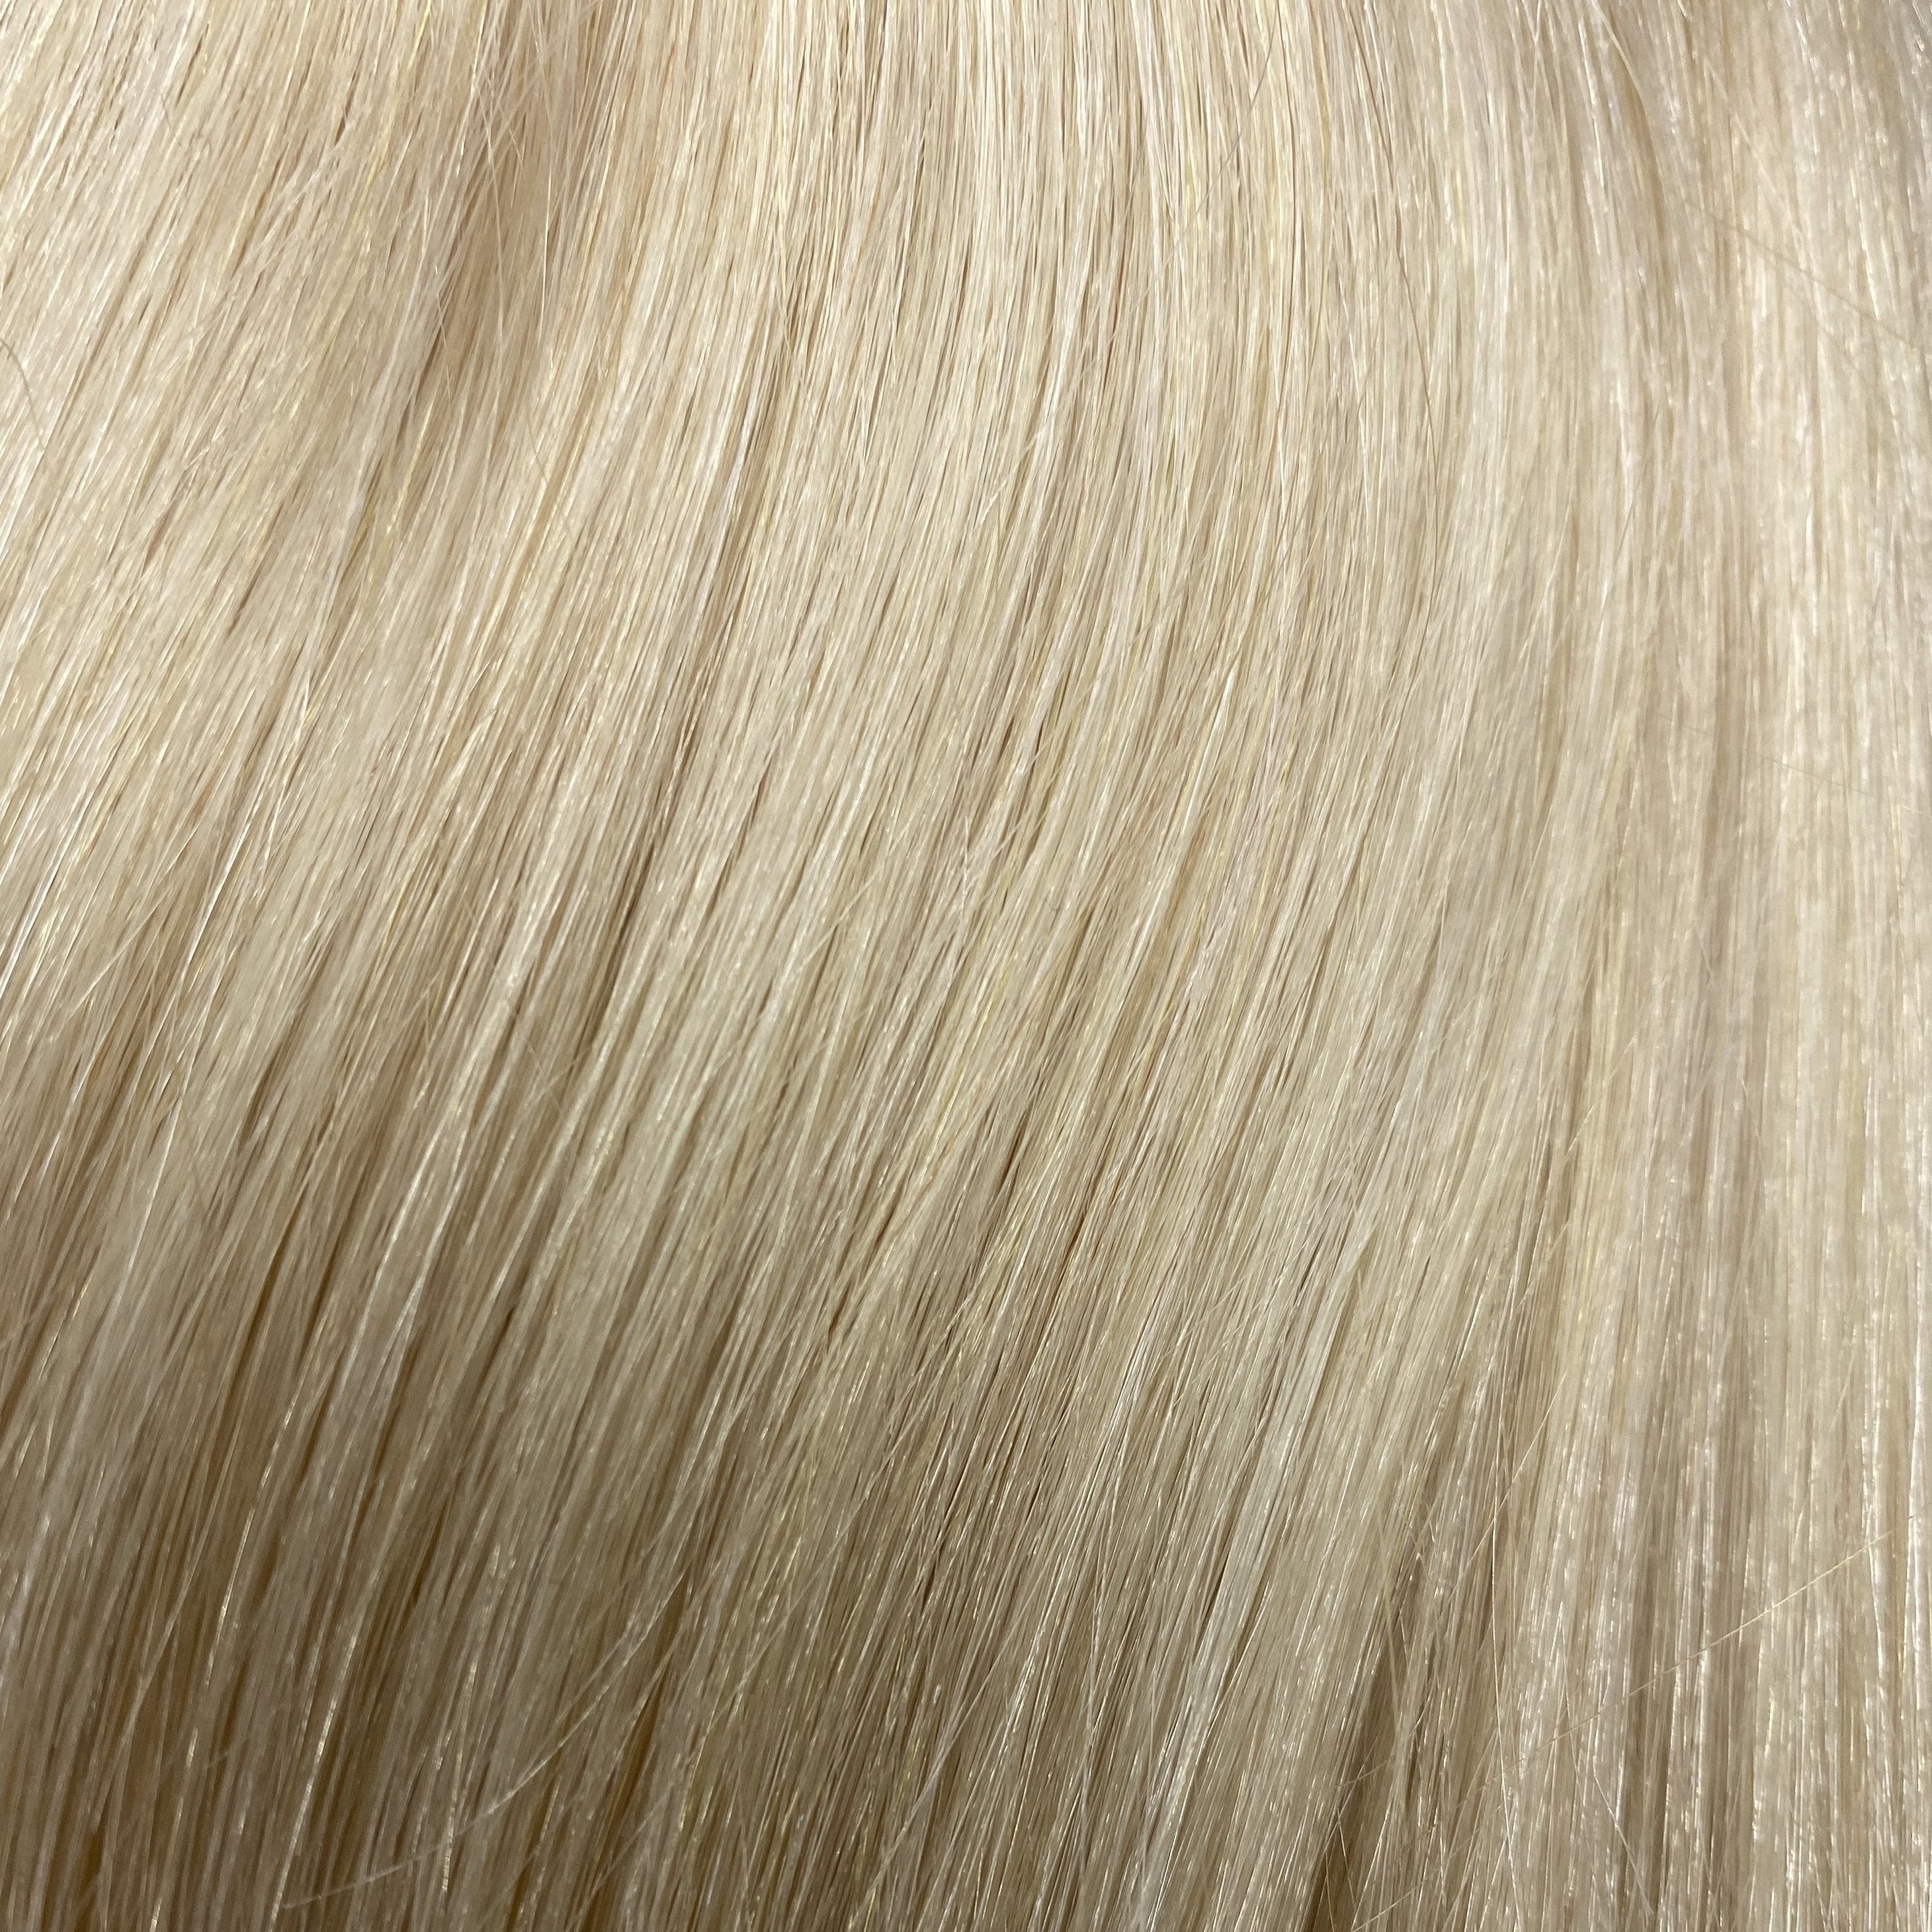 Velo #1002 - 16 Inches - Very Light Ash Blonde - 170 Grams | clip in hair extensions